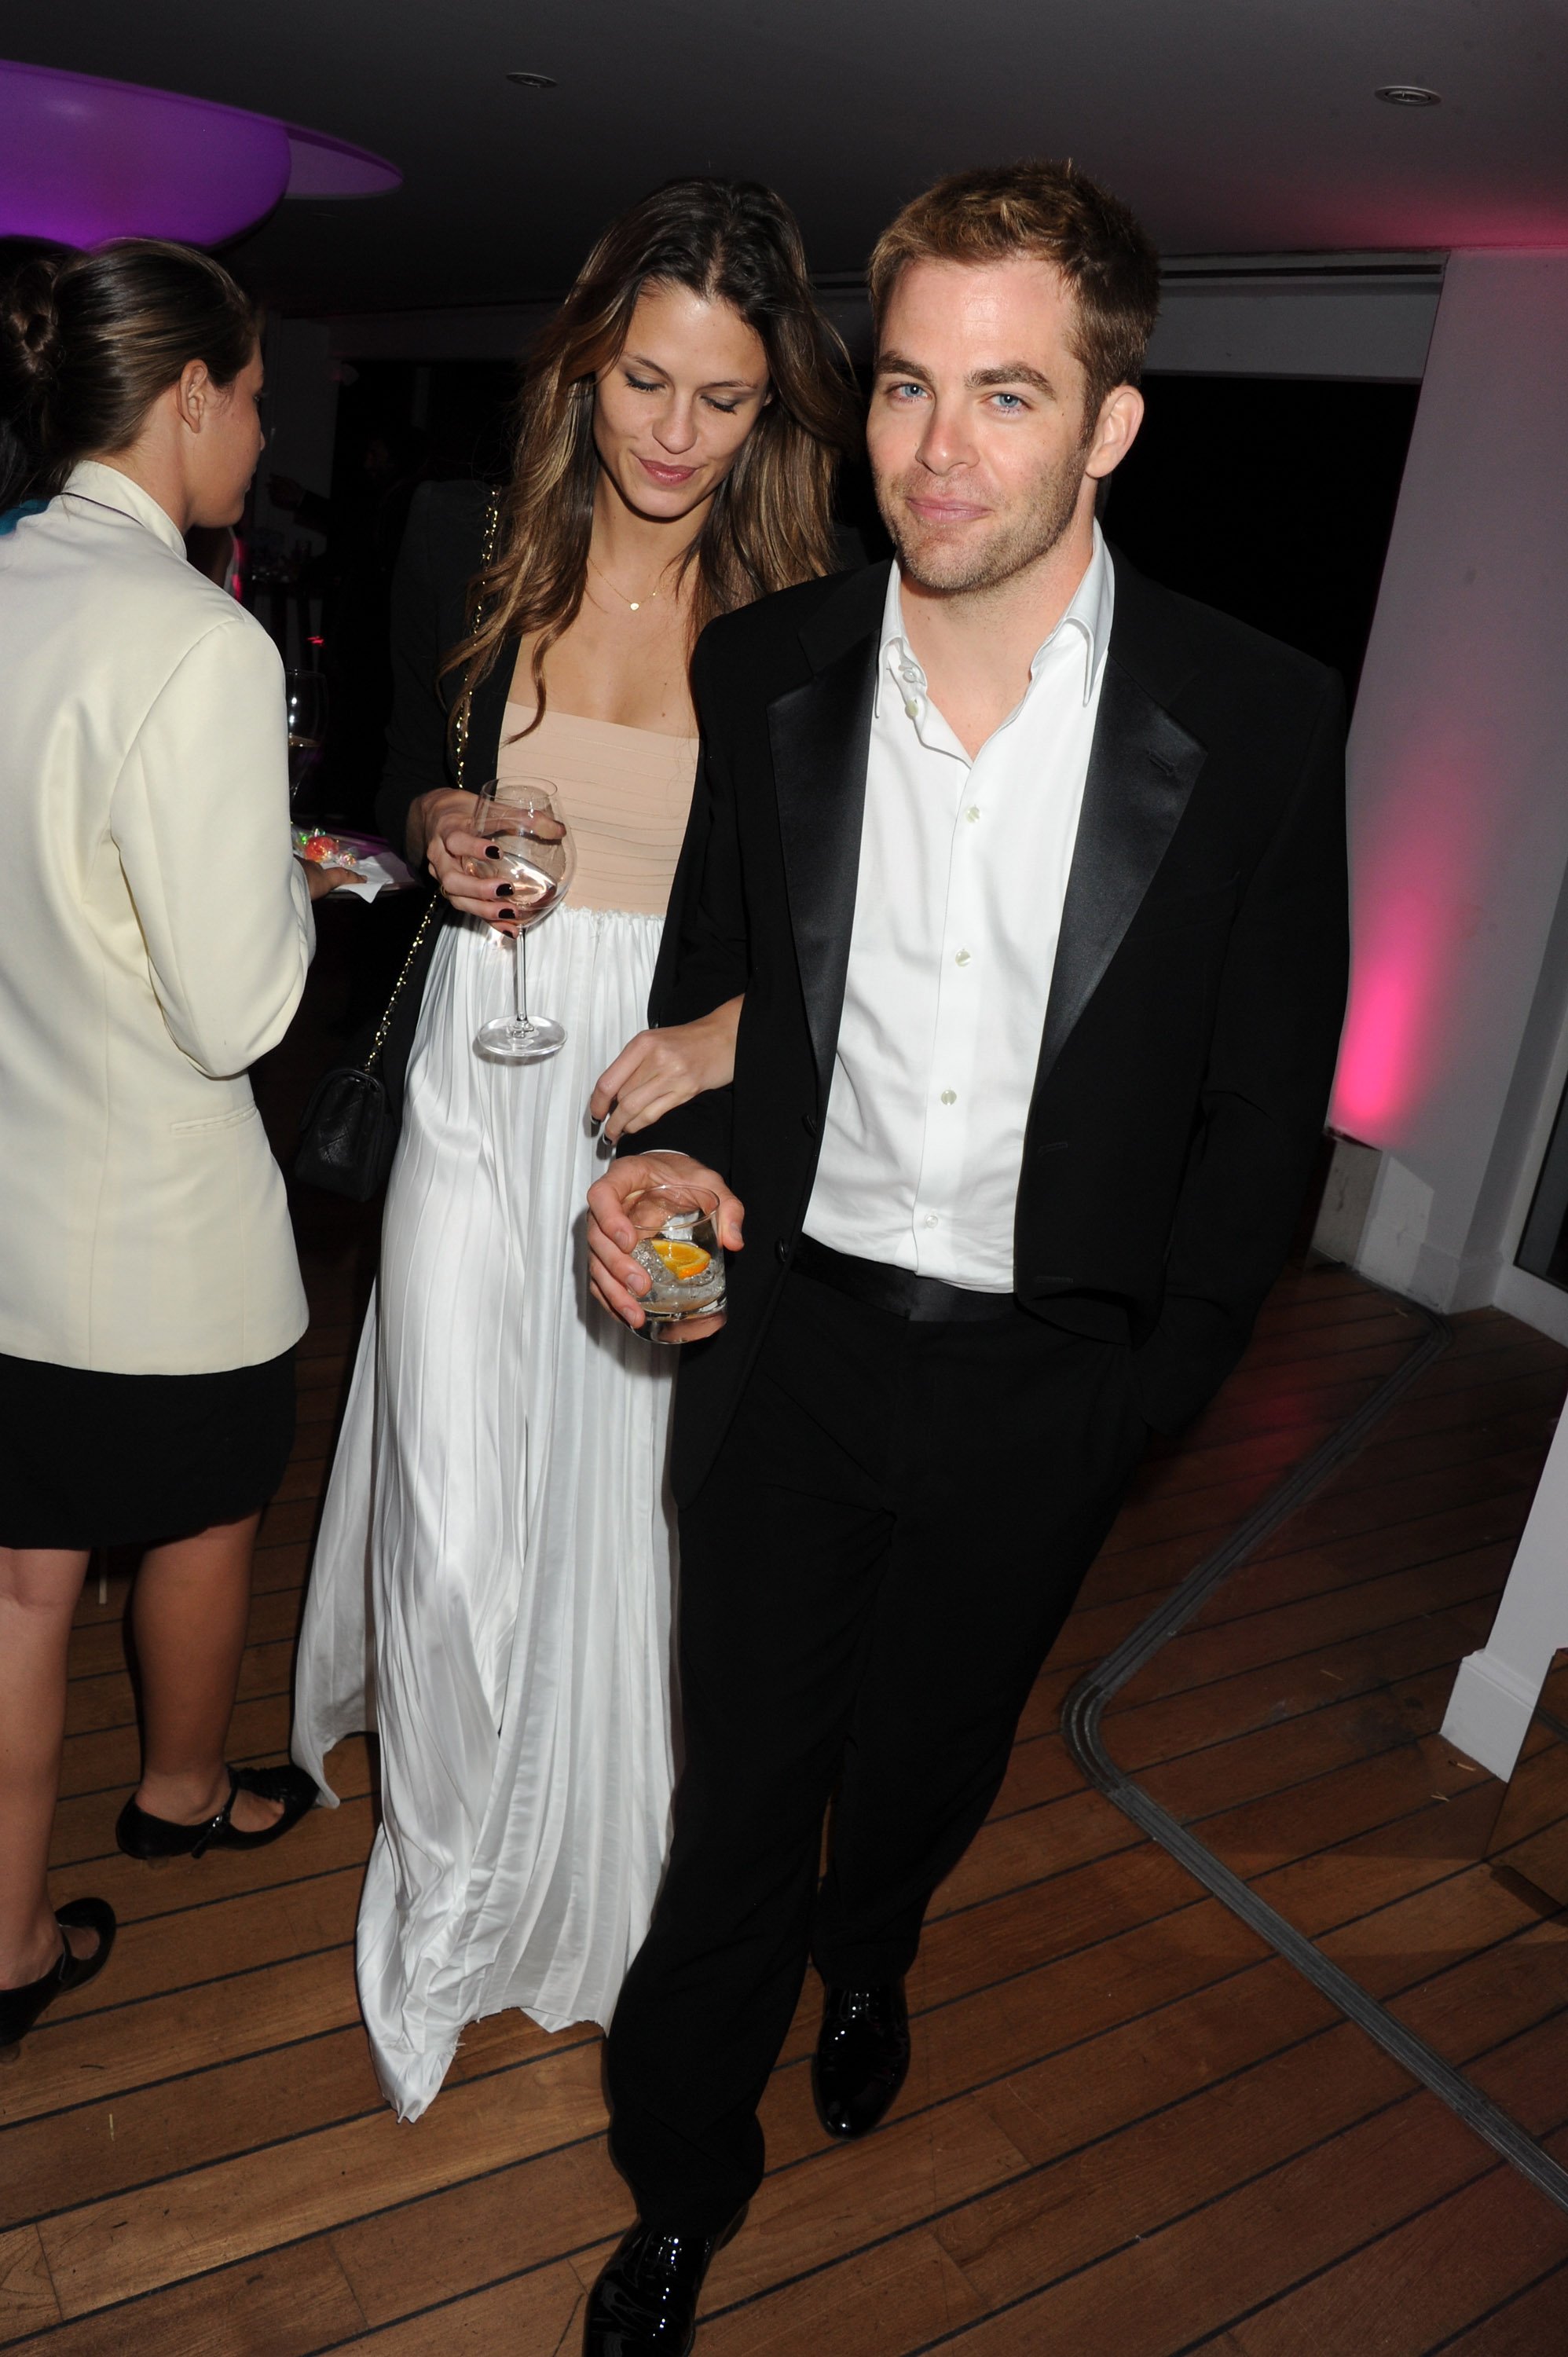 Chris Pine and Dominique Piek are photographed at the Vanity Fair And Gucci Party during the 65th Annual Cannes Film Festival in Antibes | Source: Getty Images